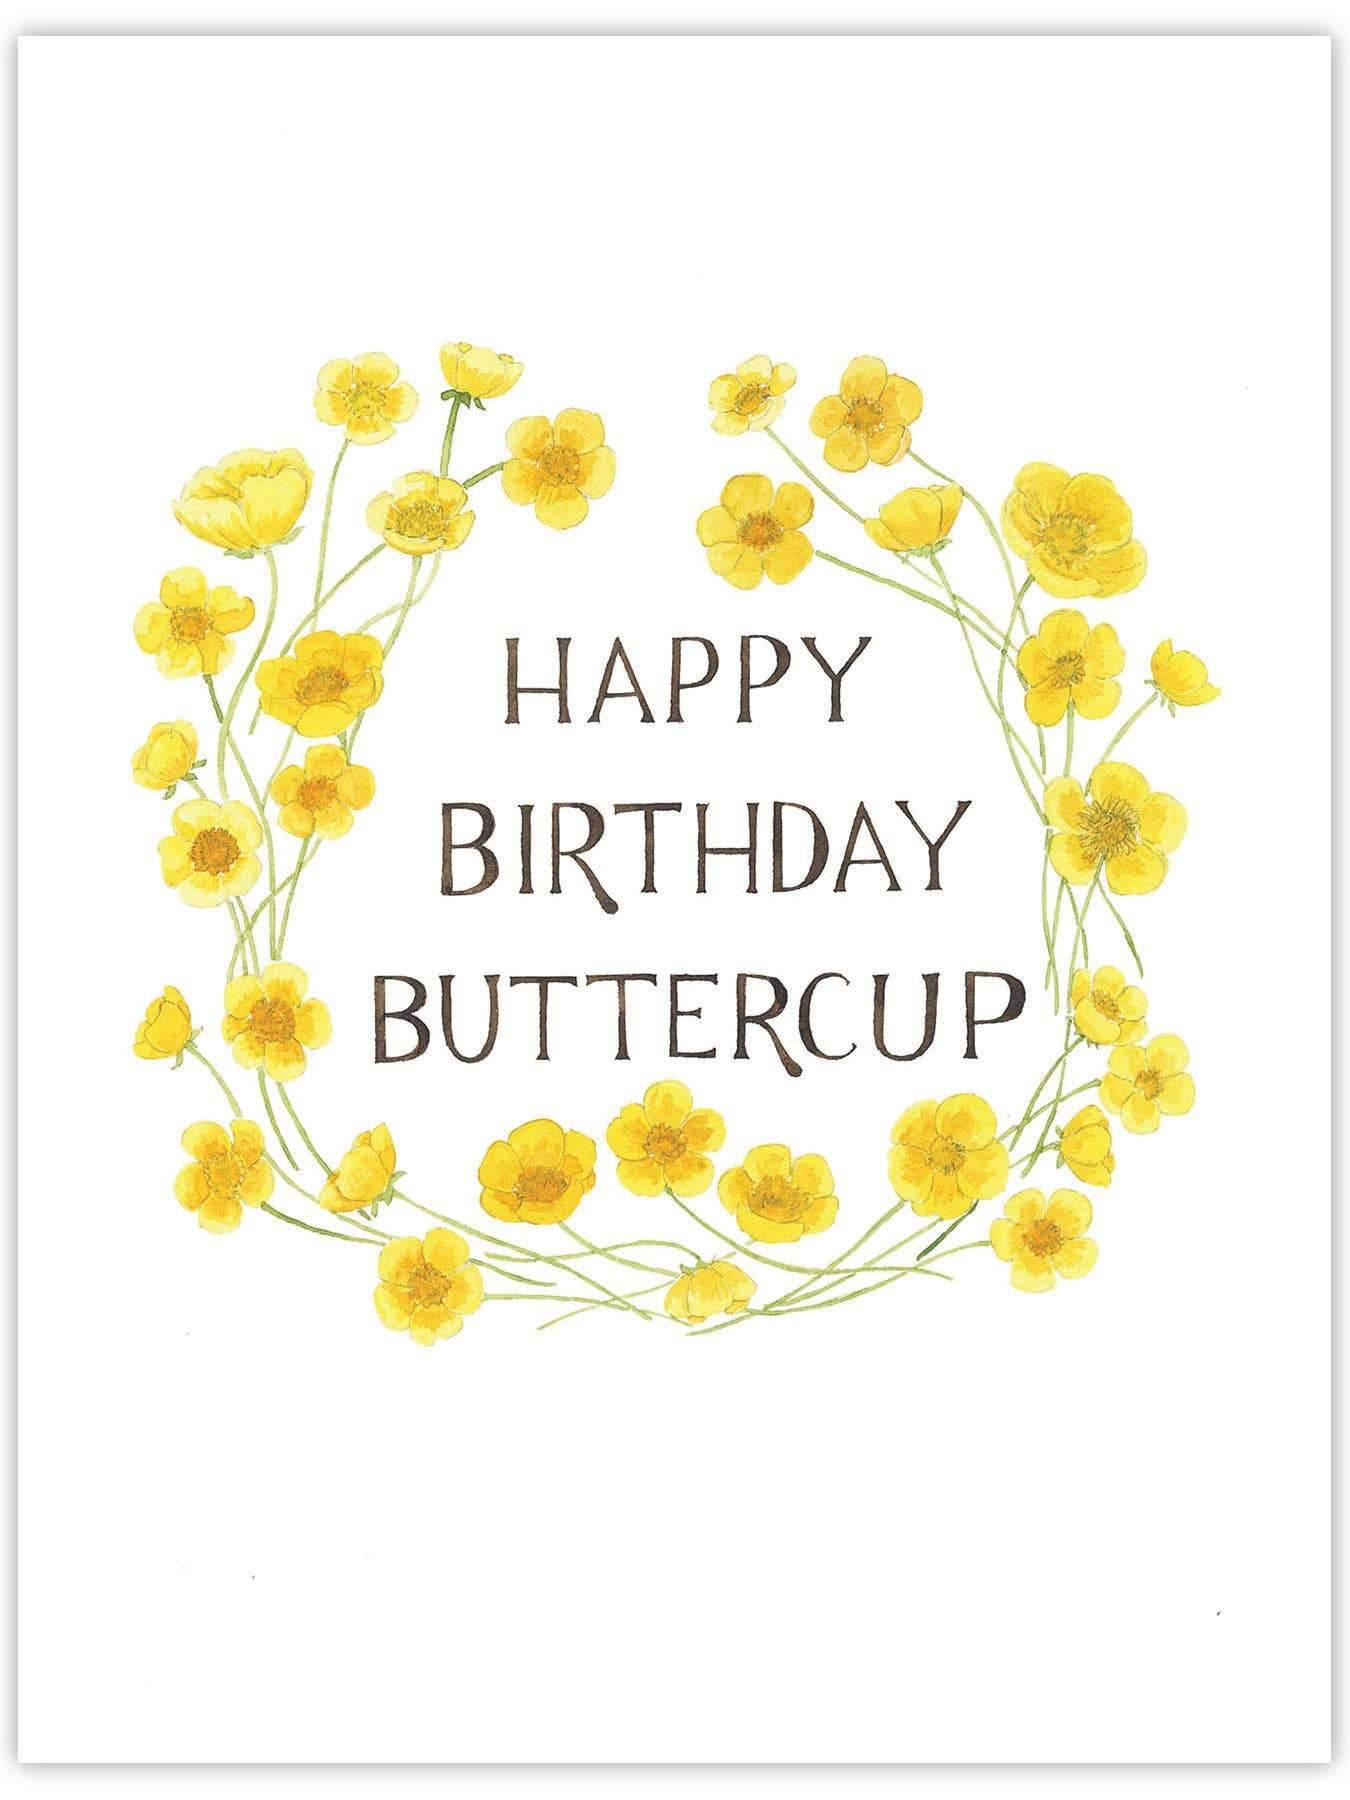 Buttercup Birthday Card - DIGS